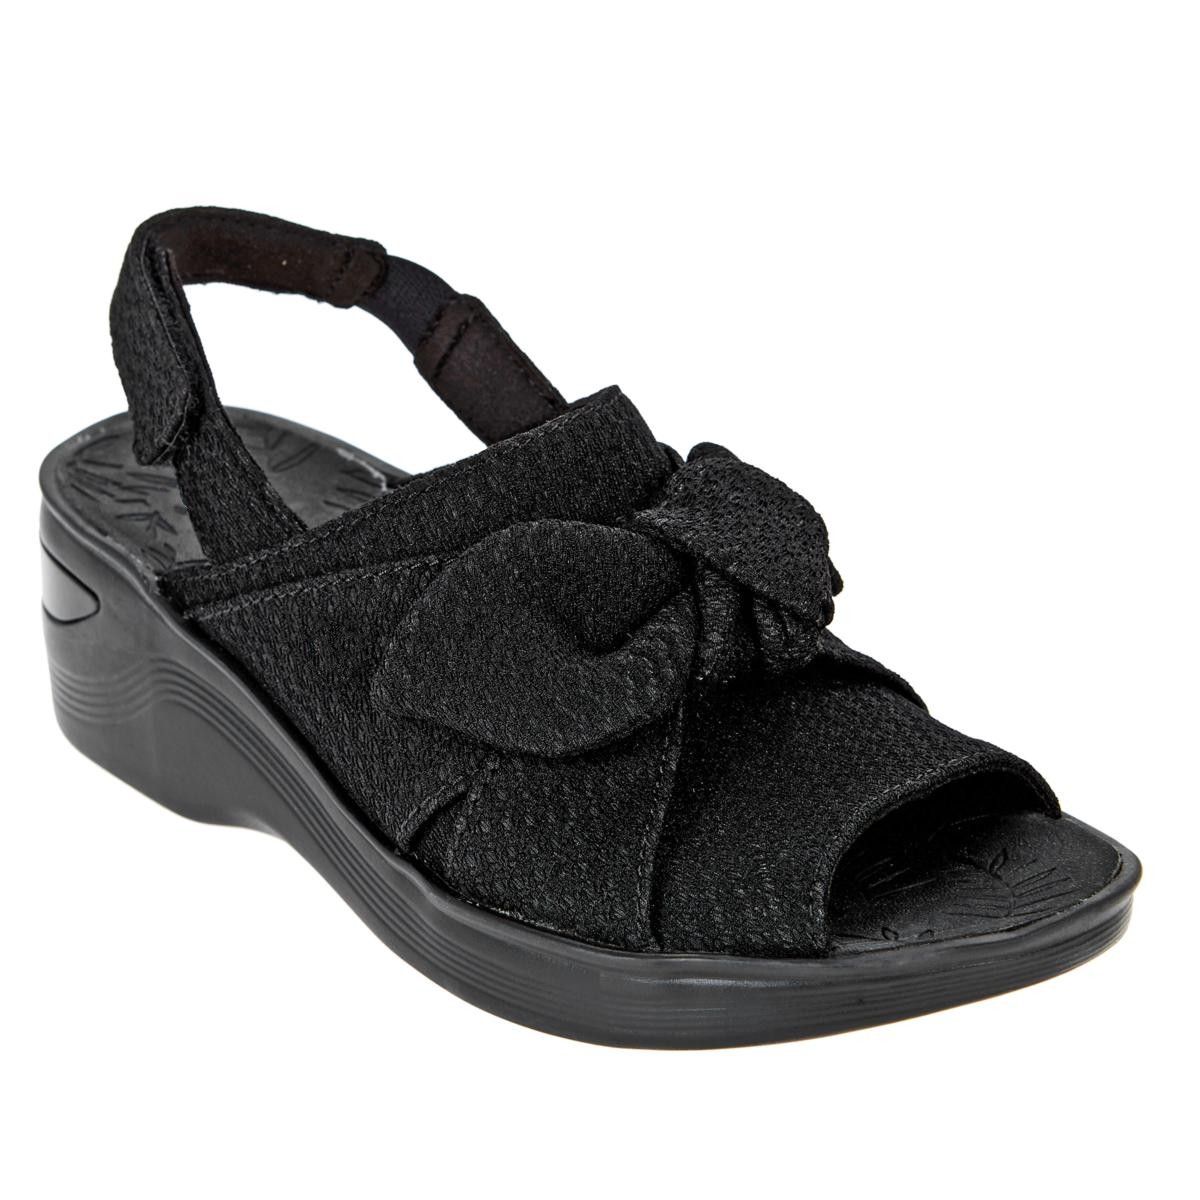 Up to 70 off!-2023 New Women's Bowknot Orthotic Sandal